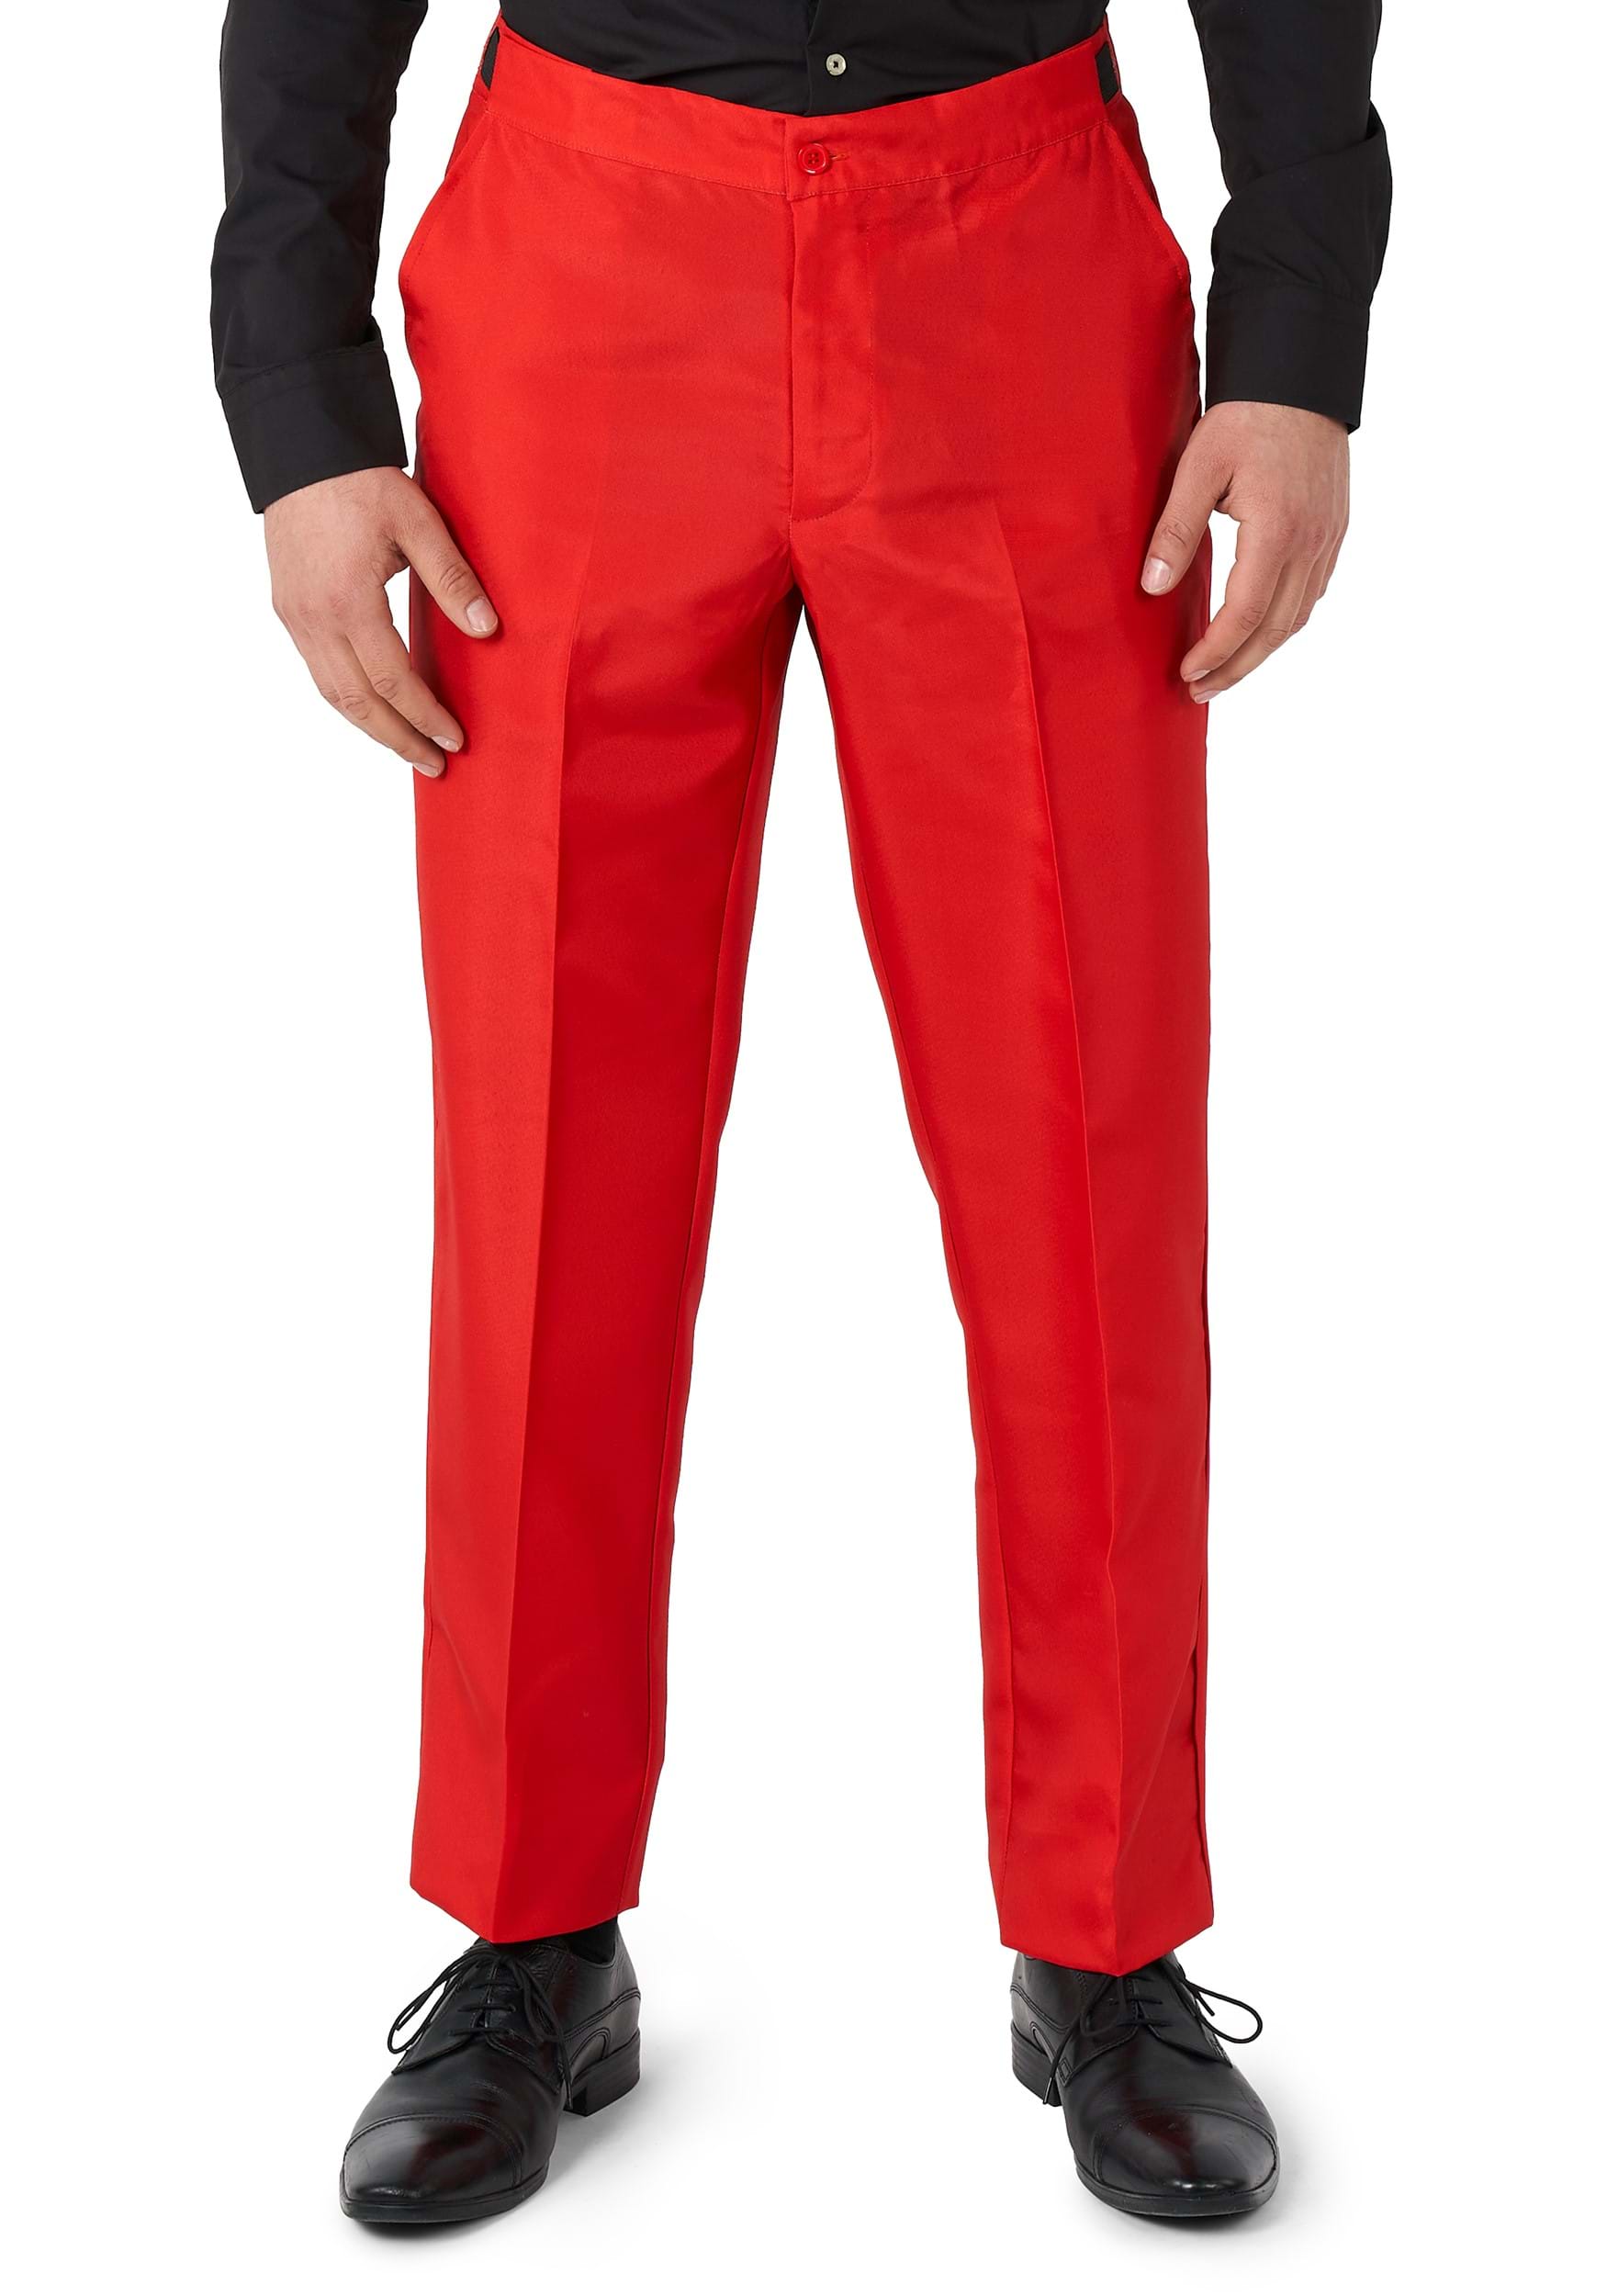 Red Pantsuit - Etsy